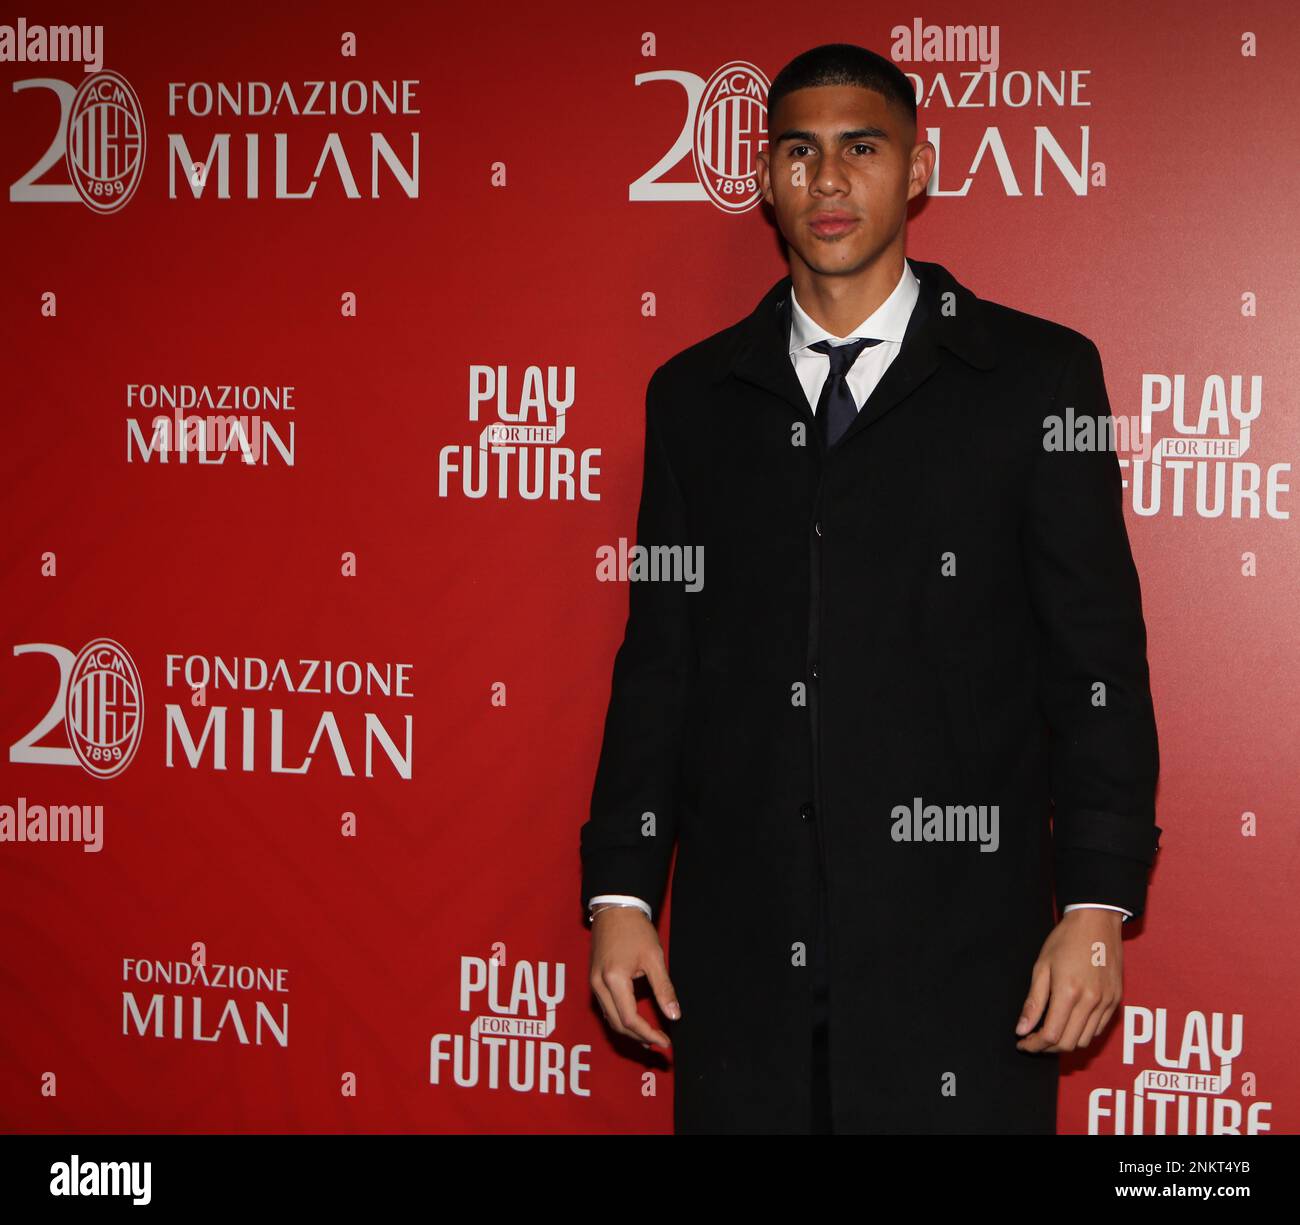 Milan, Italy. 23rd Feb, 2023. AC Milan goalkeeper Devis Vasquez of Colombia attends the Gala Dinner held to celebrate the 20th Anniversary of the Fondazione Milan in Milan, Italy Credit: Mickael Chavet/Alamy Live News Stock Photo